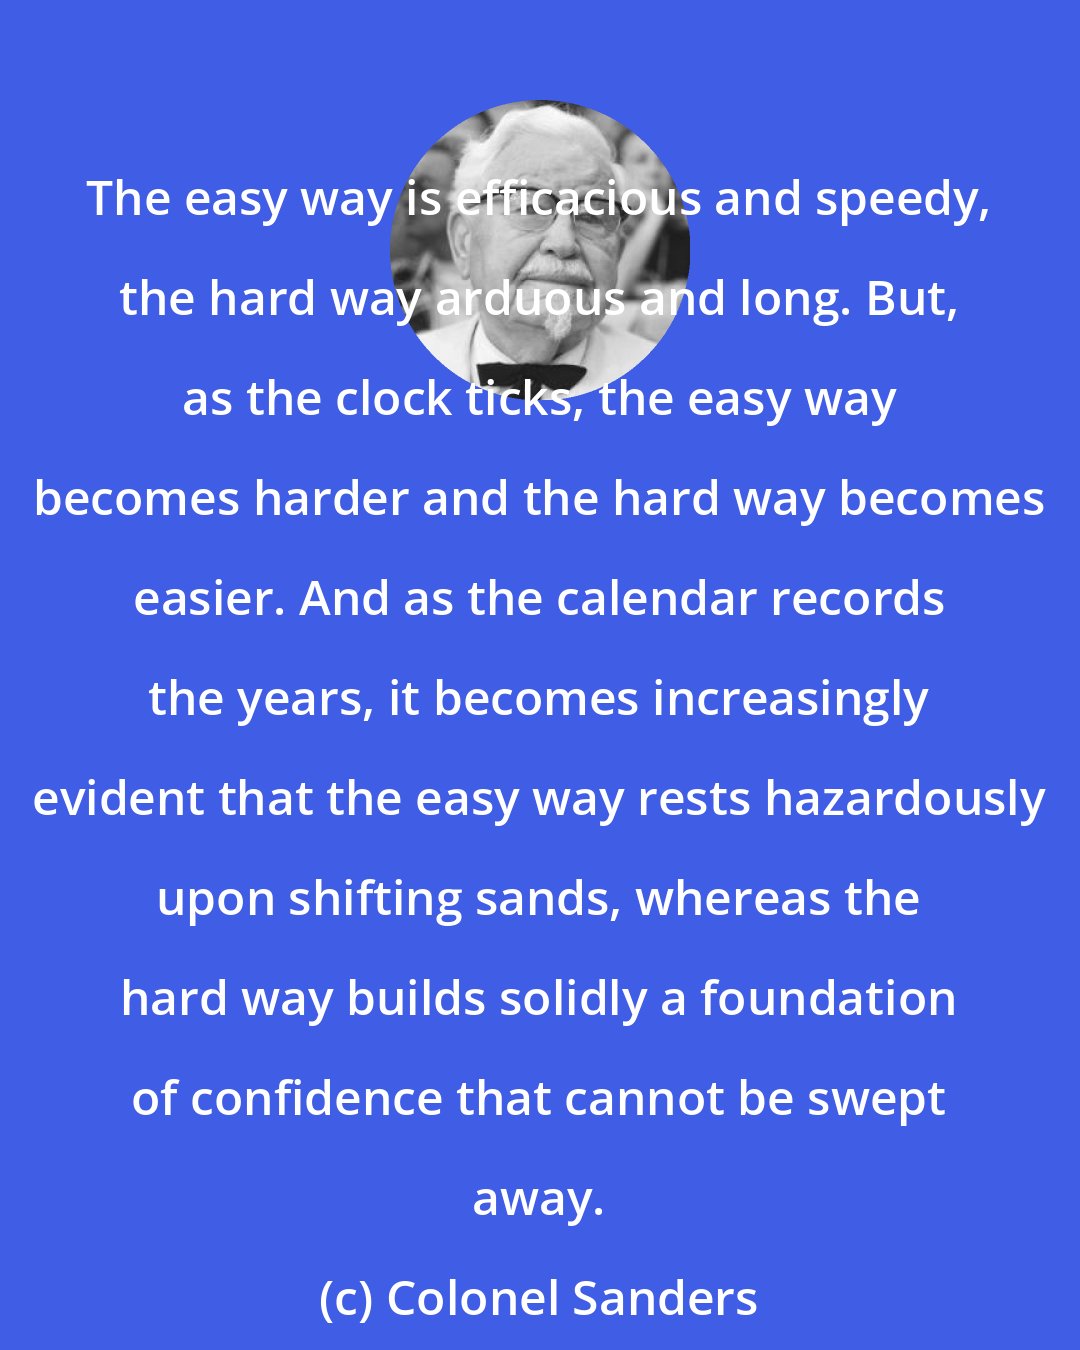 Colonel Sanders: The easy way is efficacious and speedy, the hard way arduous and long. But, as the clock ticks, the easy way becomes harder and the hard way becomes easier. And as the calendar records the years, it becomes increasingly evident that the easy way rests hazardously upon shifting sands, whereas the hard way builds solidly a foundation of confidence that cannot be swept away.